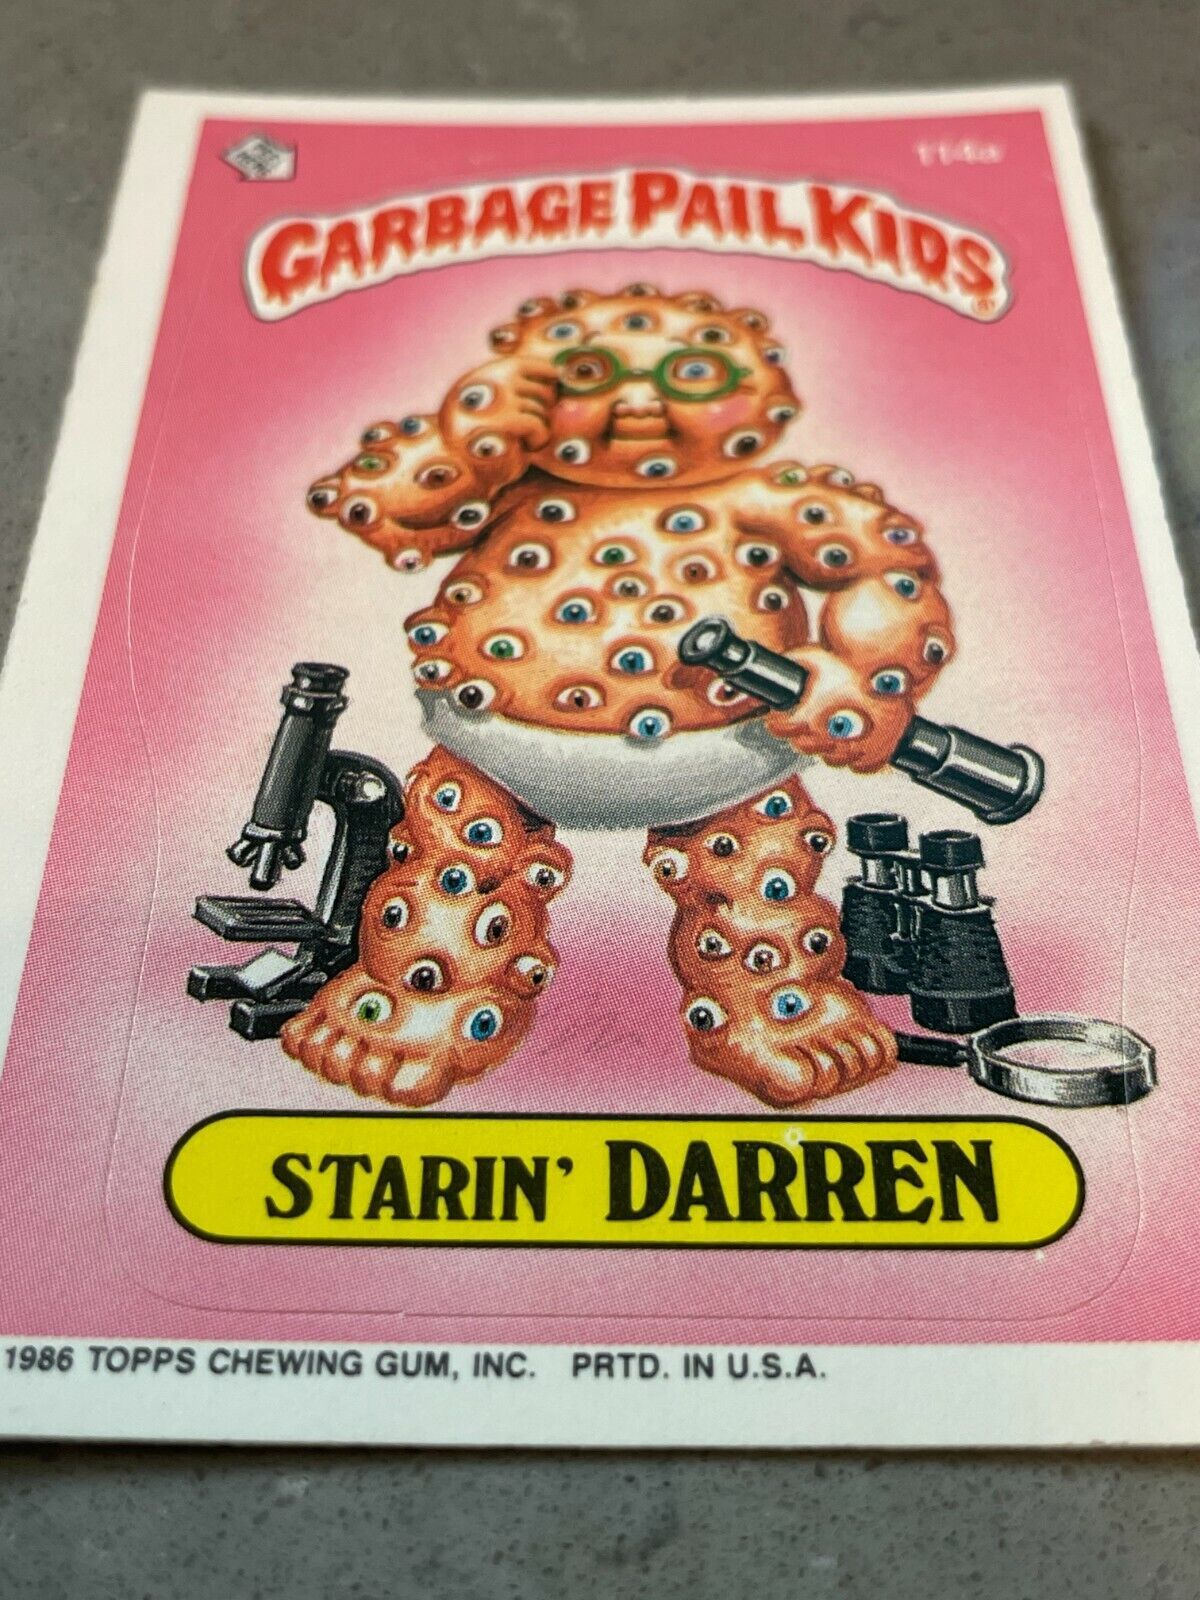 Primary image for 1986 Topps OS3 Garbage Pail Kids 114a STARIN' DARREN Trading Card DIECUT ERROR